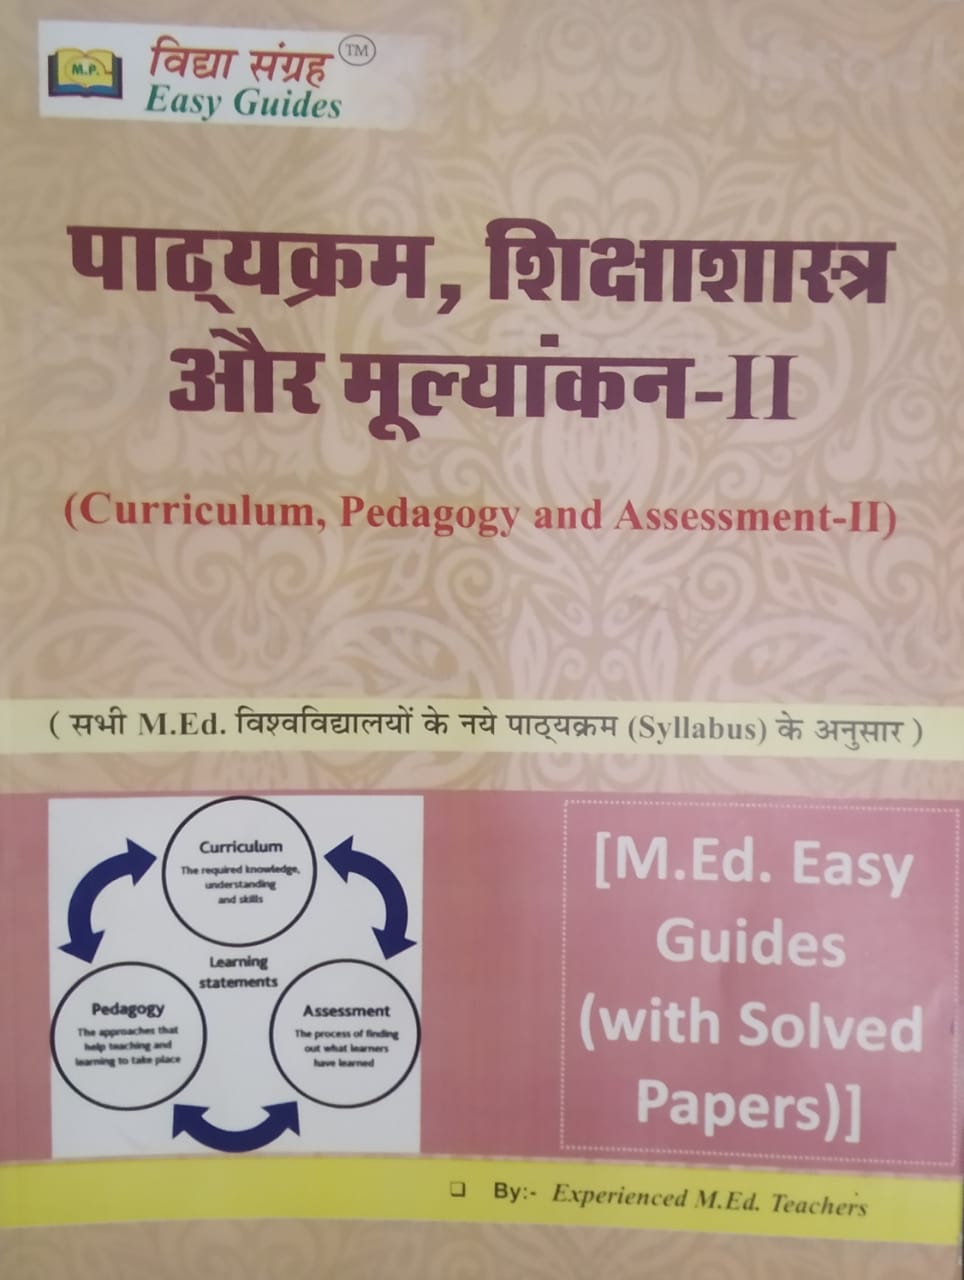 Curriculum, Pedagogy And Assessment-II Hindi By Experienced M.Ed. Teachers